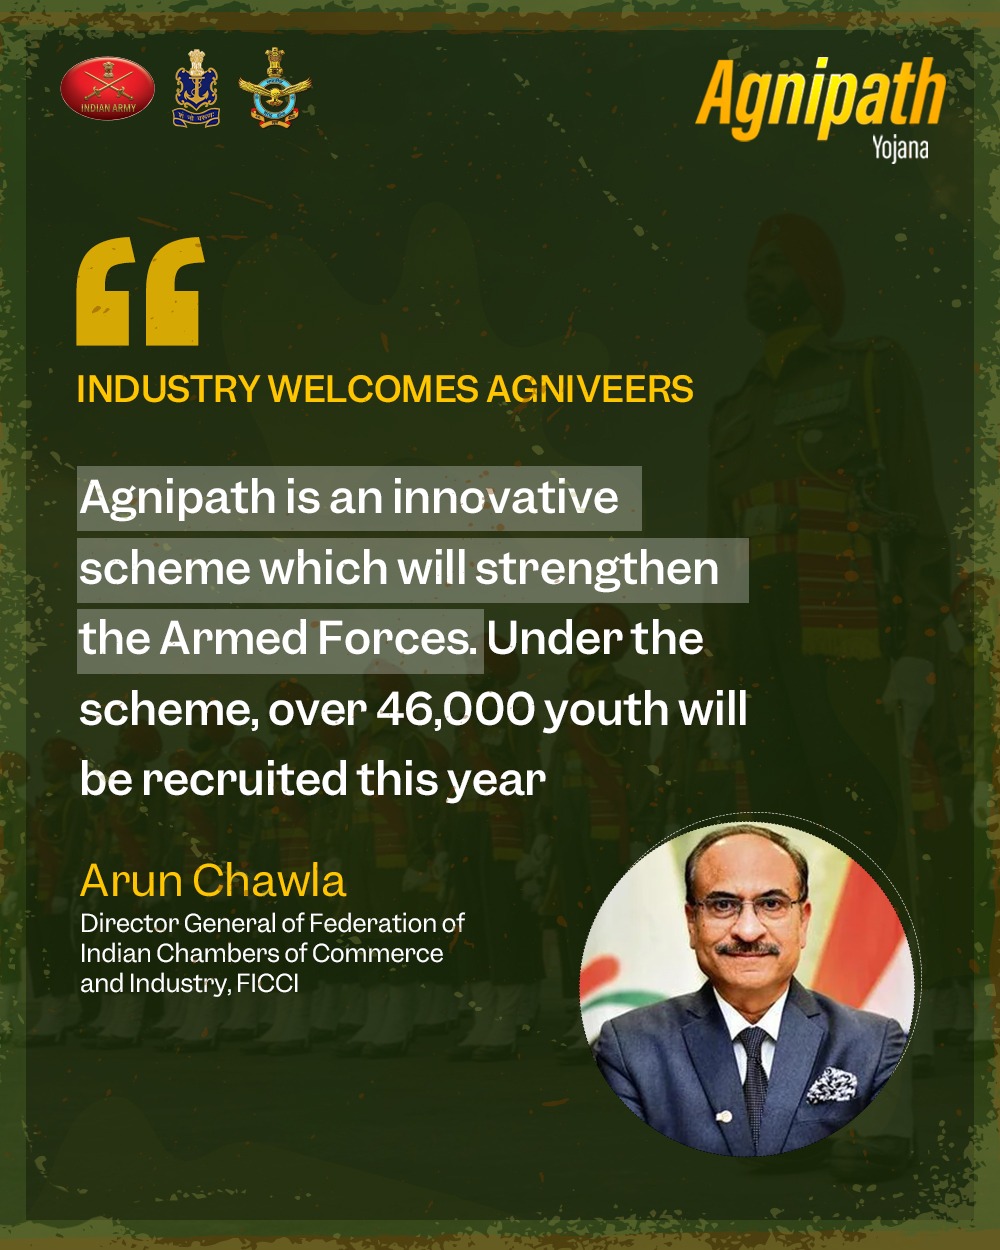 Agnipath is an innovative scheme which will strengthen the Armed Forces